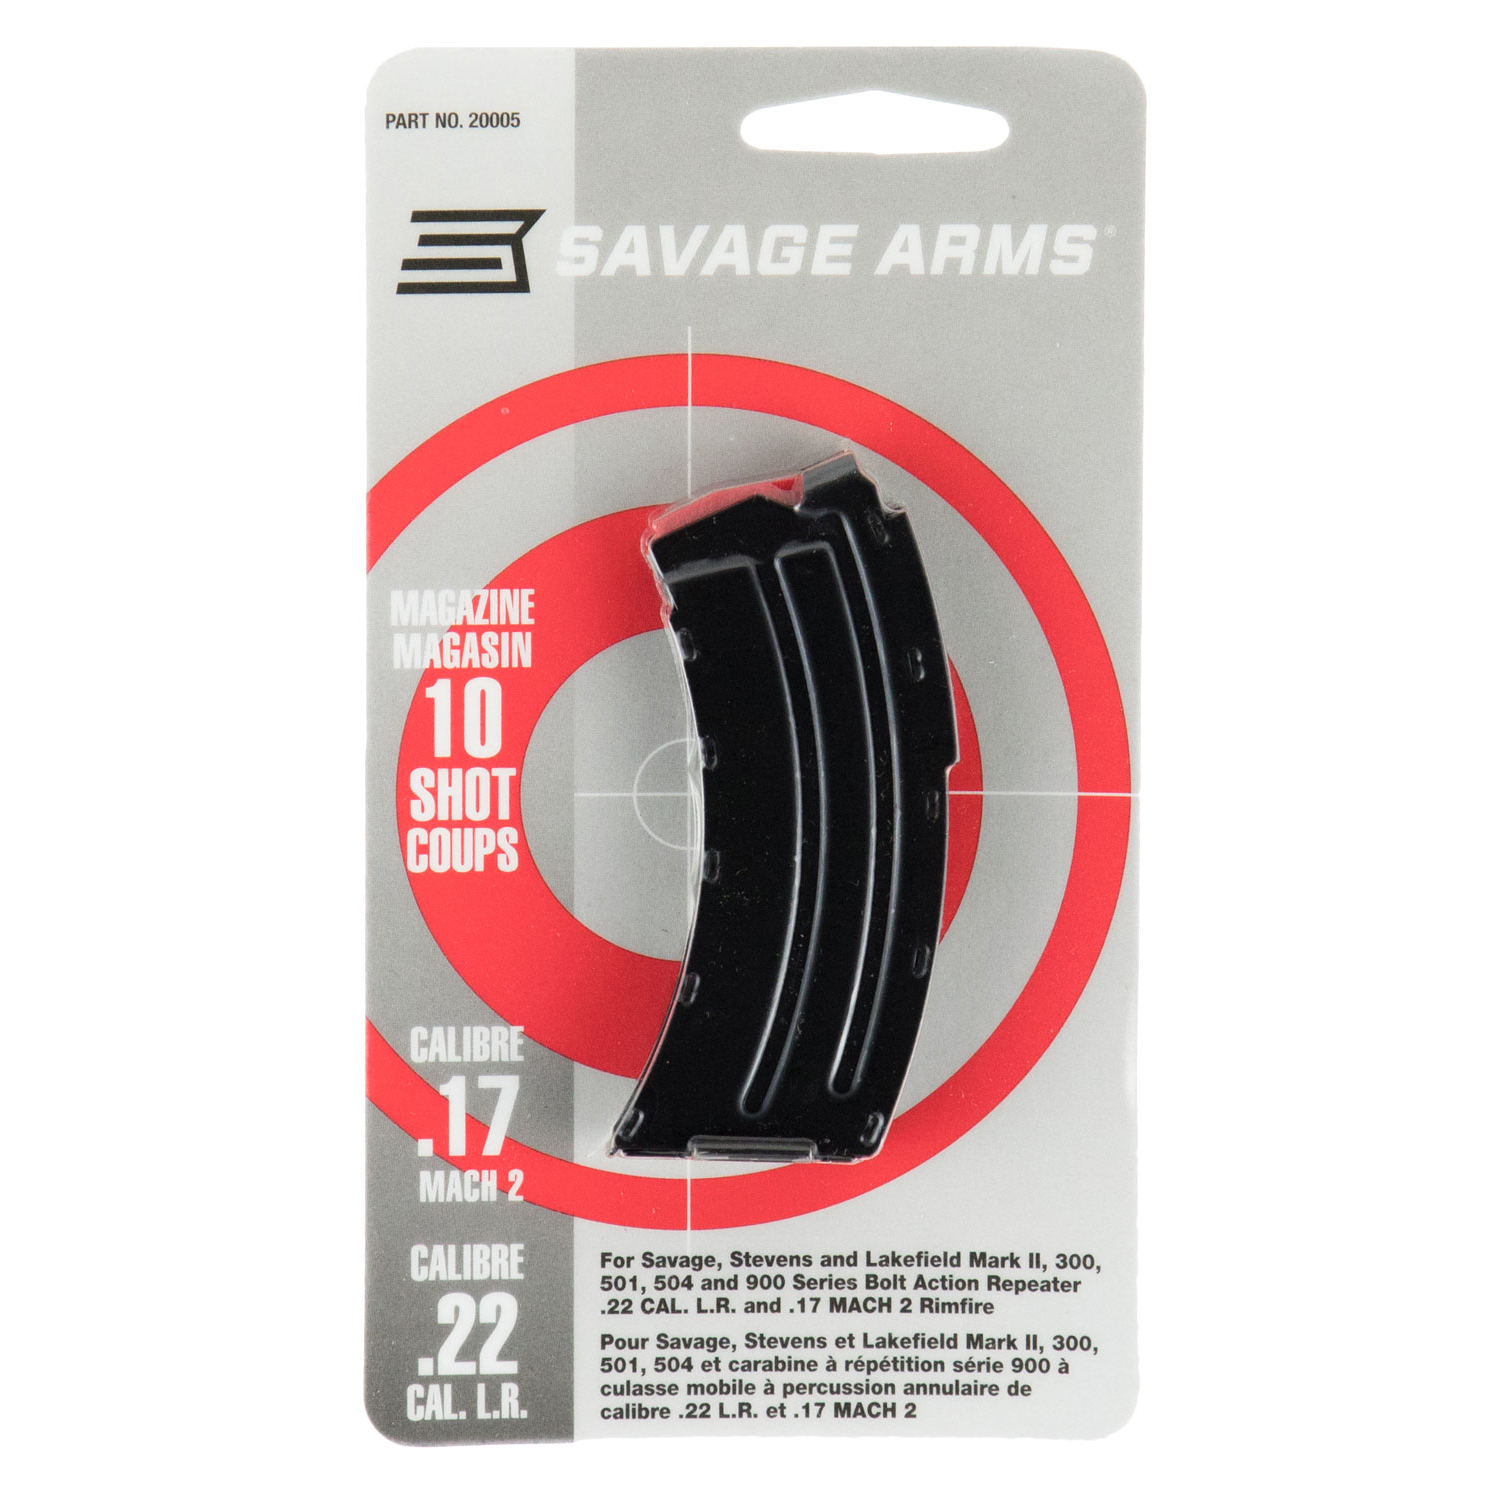 age Arms Mark II Series Magazine .22 Long Rifle/.17 Hornady Mach 2 (HM2) 10 Rounds Steel Body Black Finish Ammo